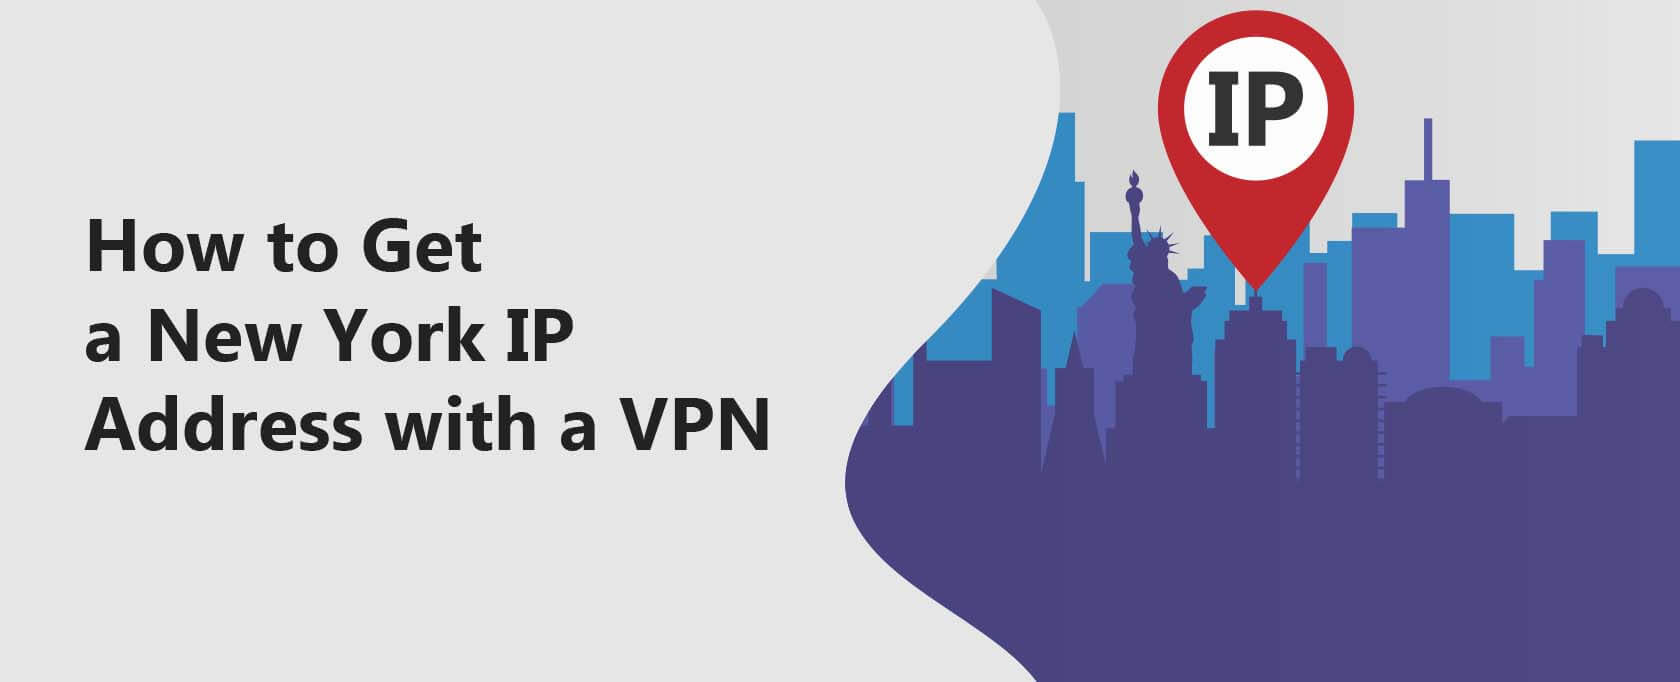 New York VPN: How to Get a New York IP Address